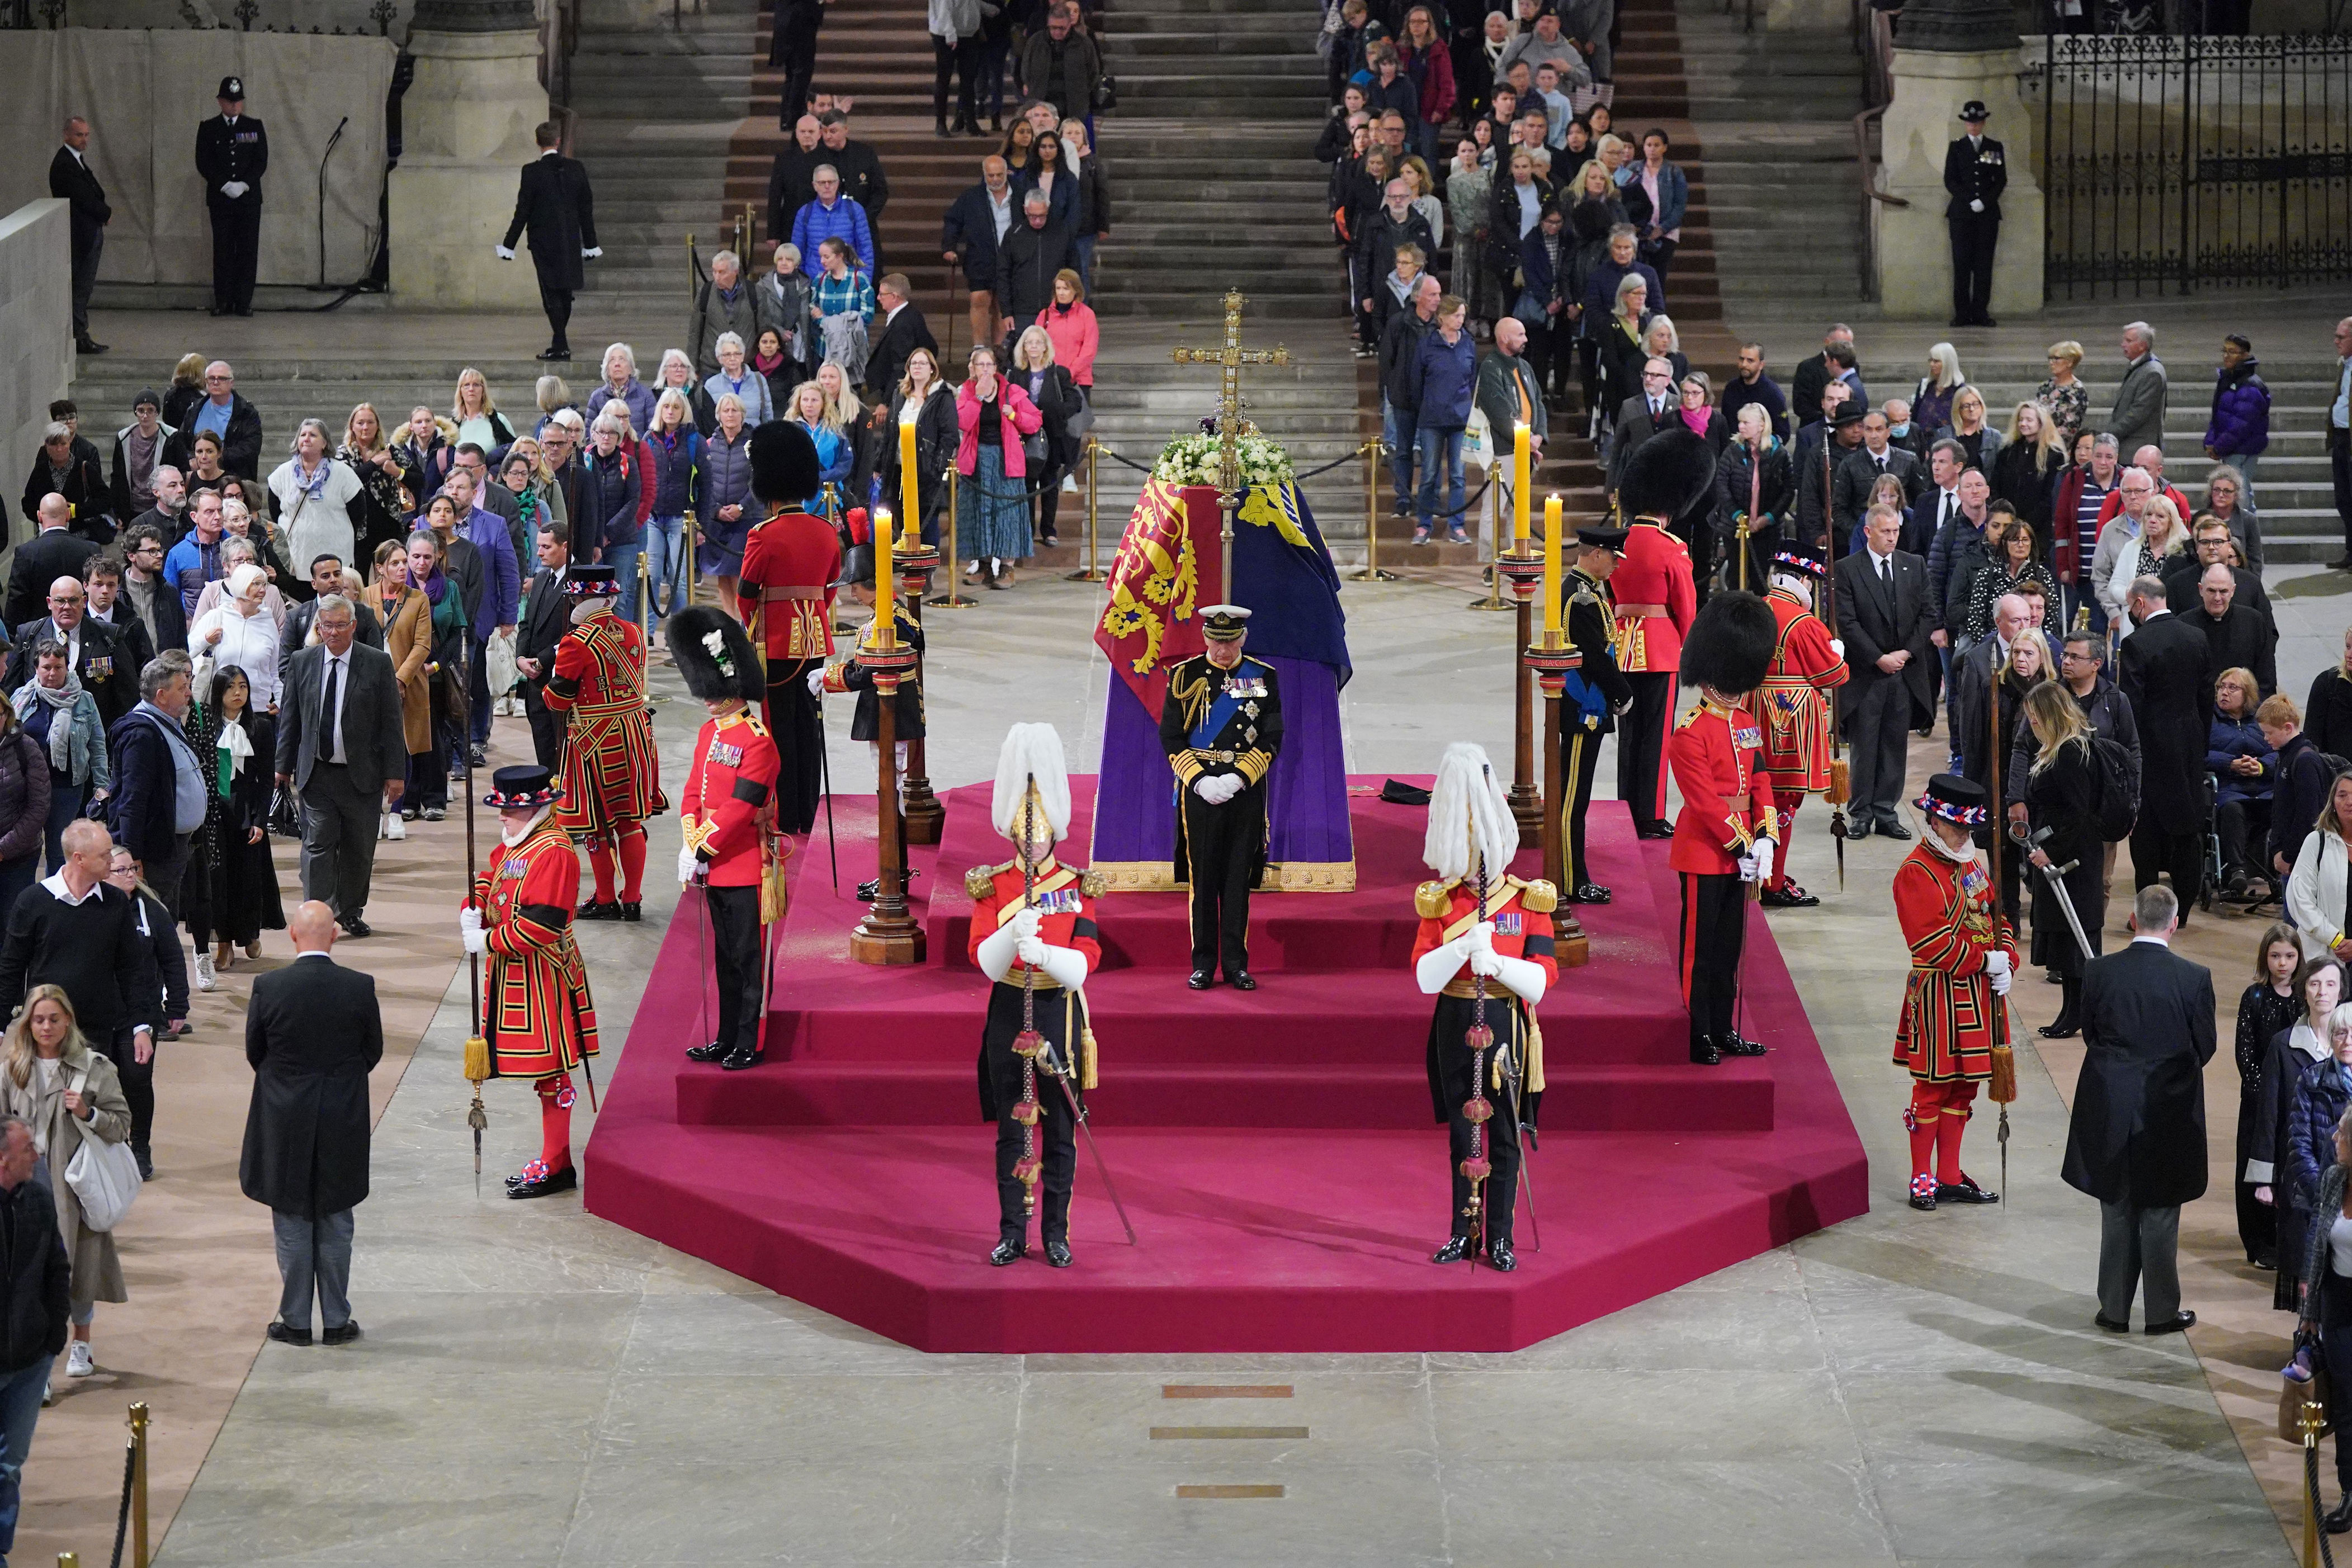 <p>Members of the public filed past as King Charles III (front), Princess Anne (left), Prince Andrew (not pictured) and Prince Edward (right) held a 15-minute vigil beside the coffin of their mother, Queen Elizabeth II, during her lying-in-state on the catafalque in Westminster Hall at the Palace of Westminster in London on Sept. 16, 2022, ahead of her funeral three days later.</p>